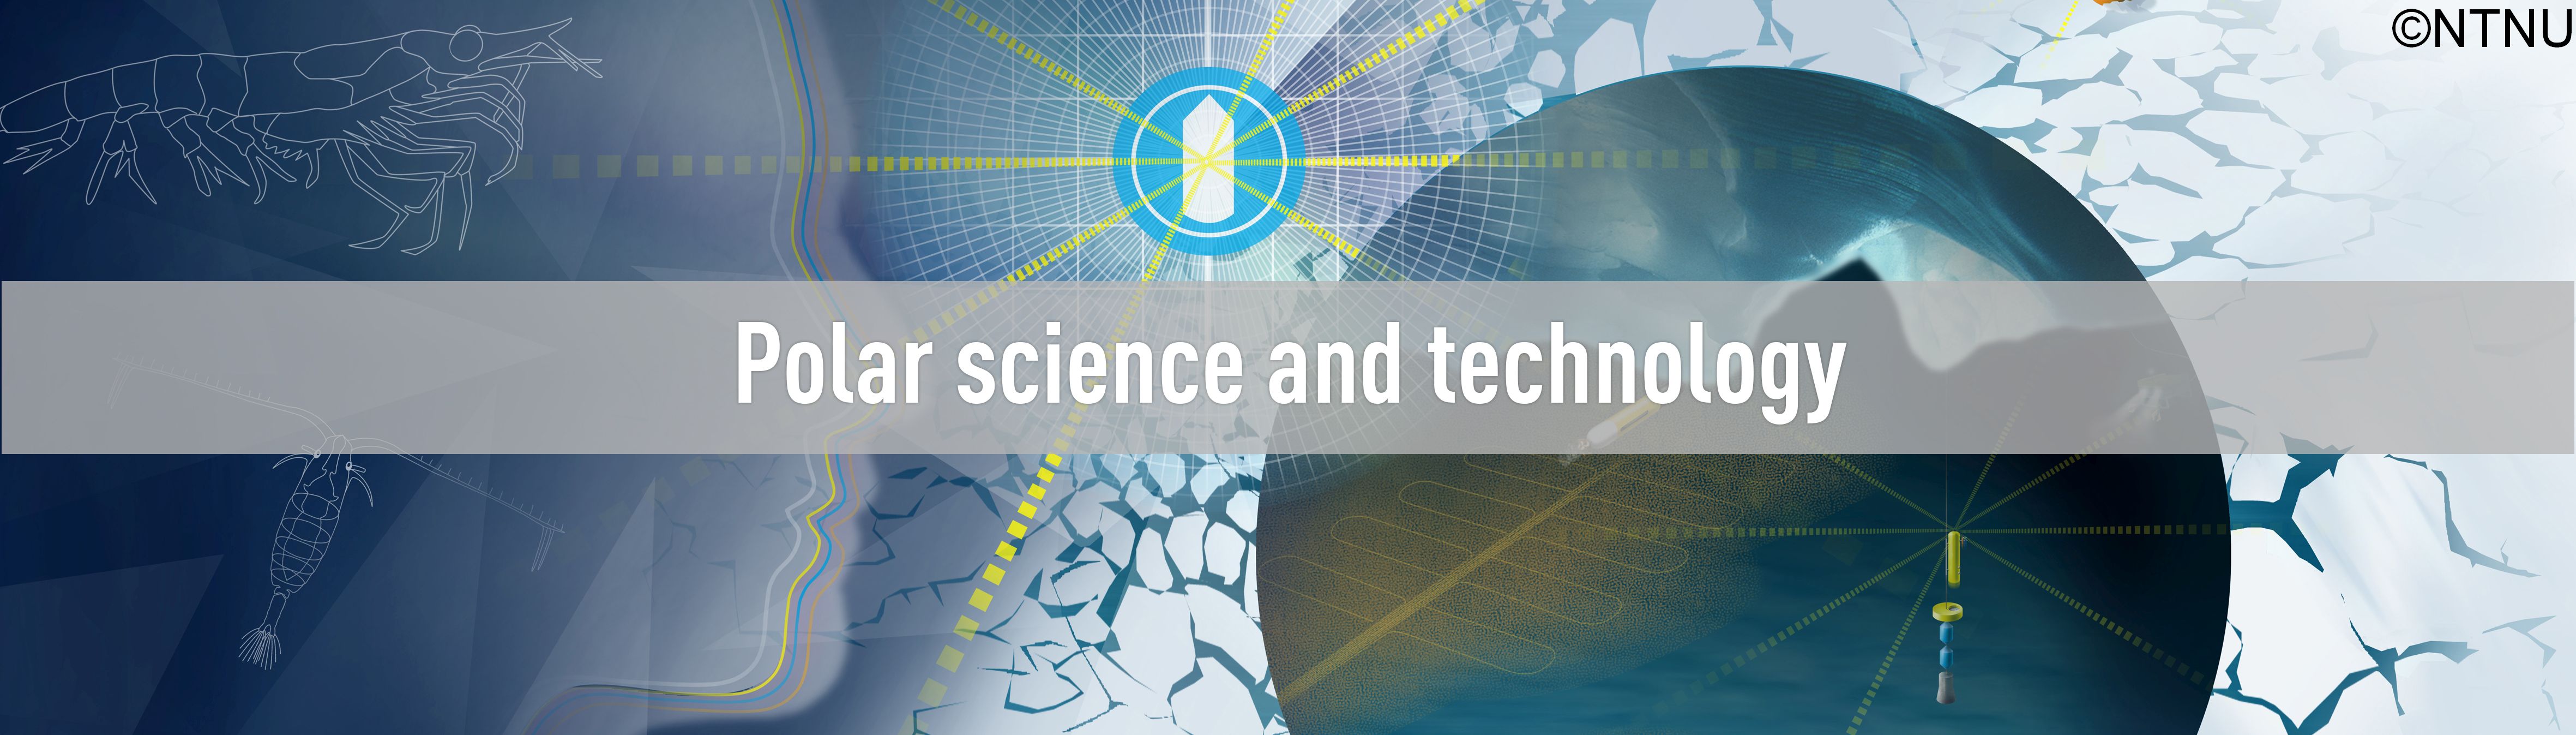 Graphic illustration with text "Polar science and technology"